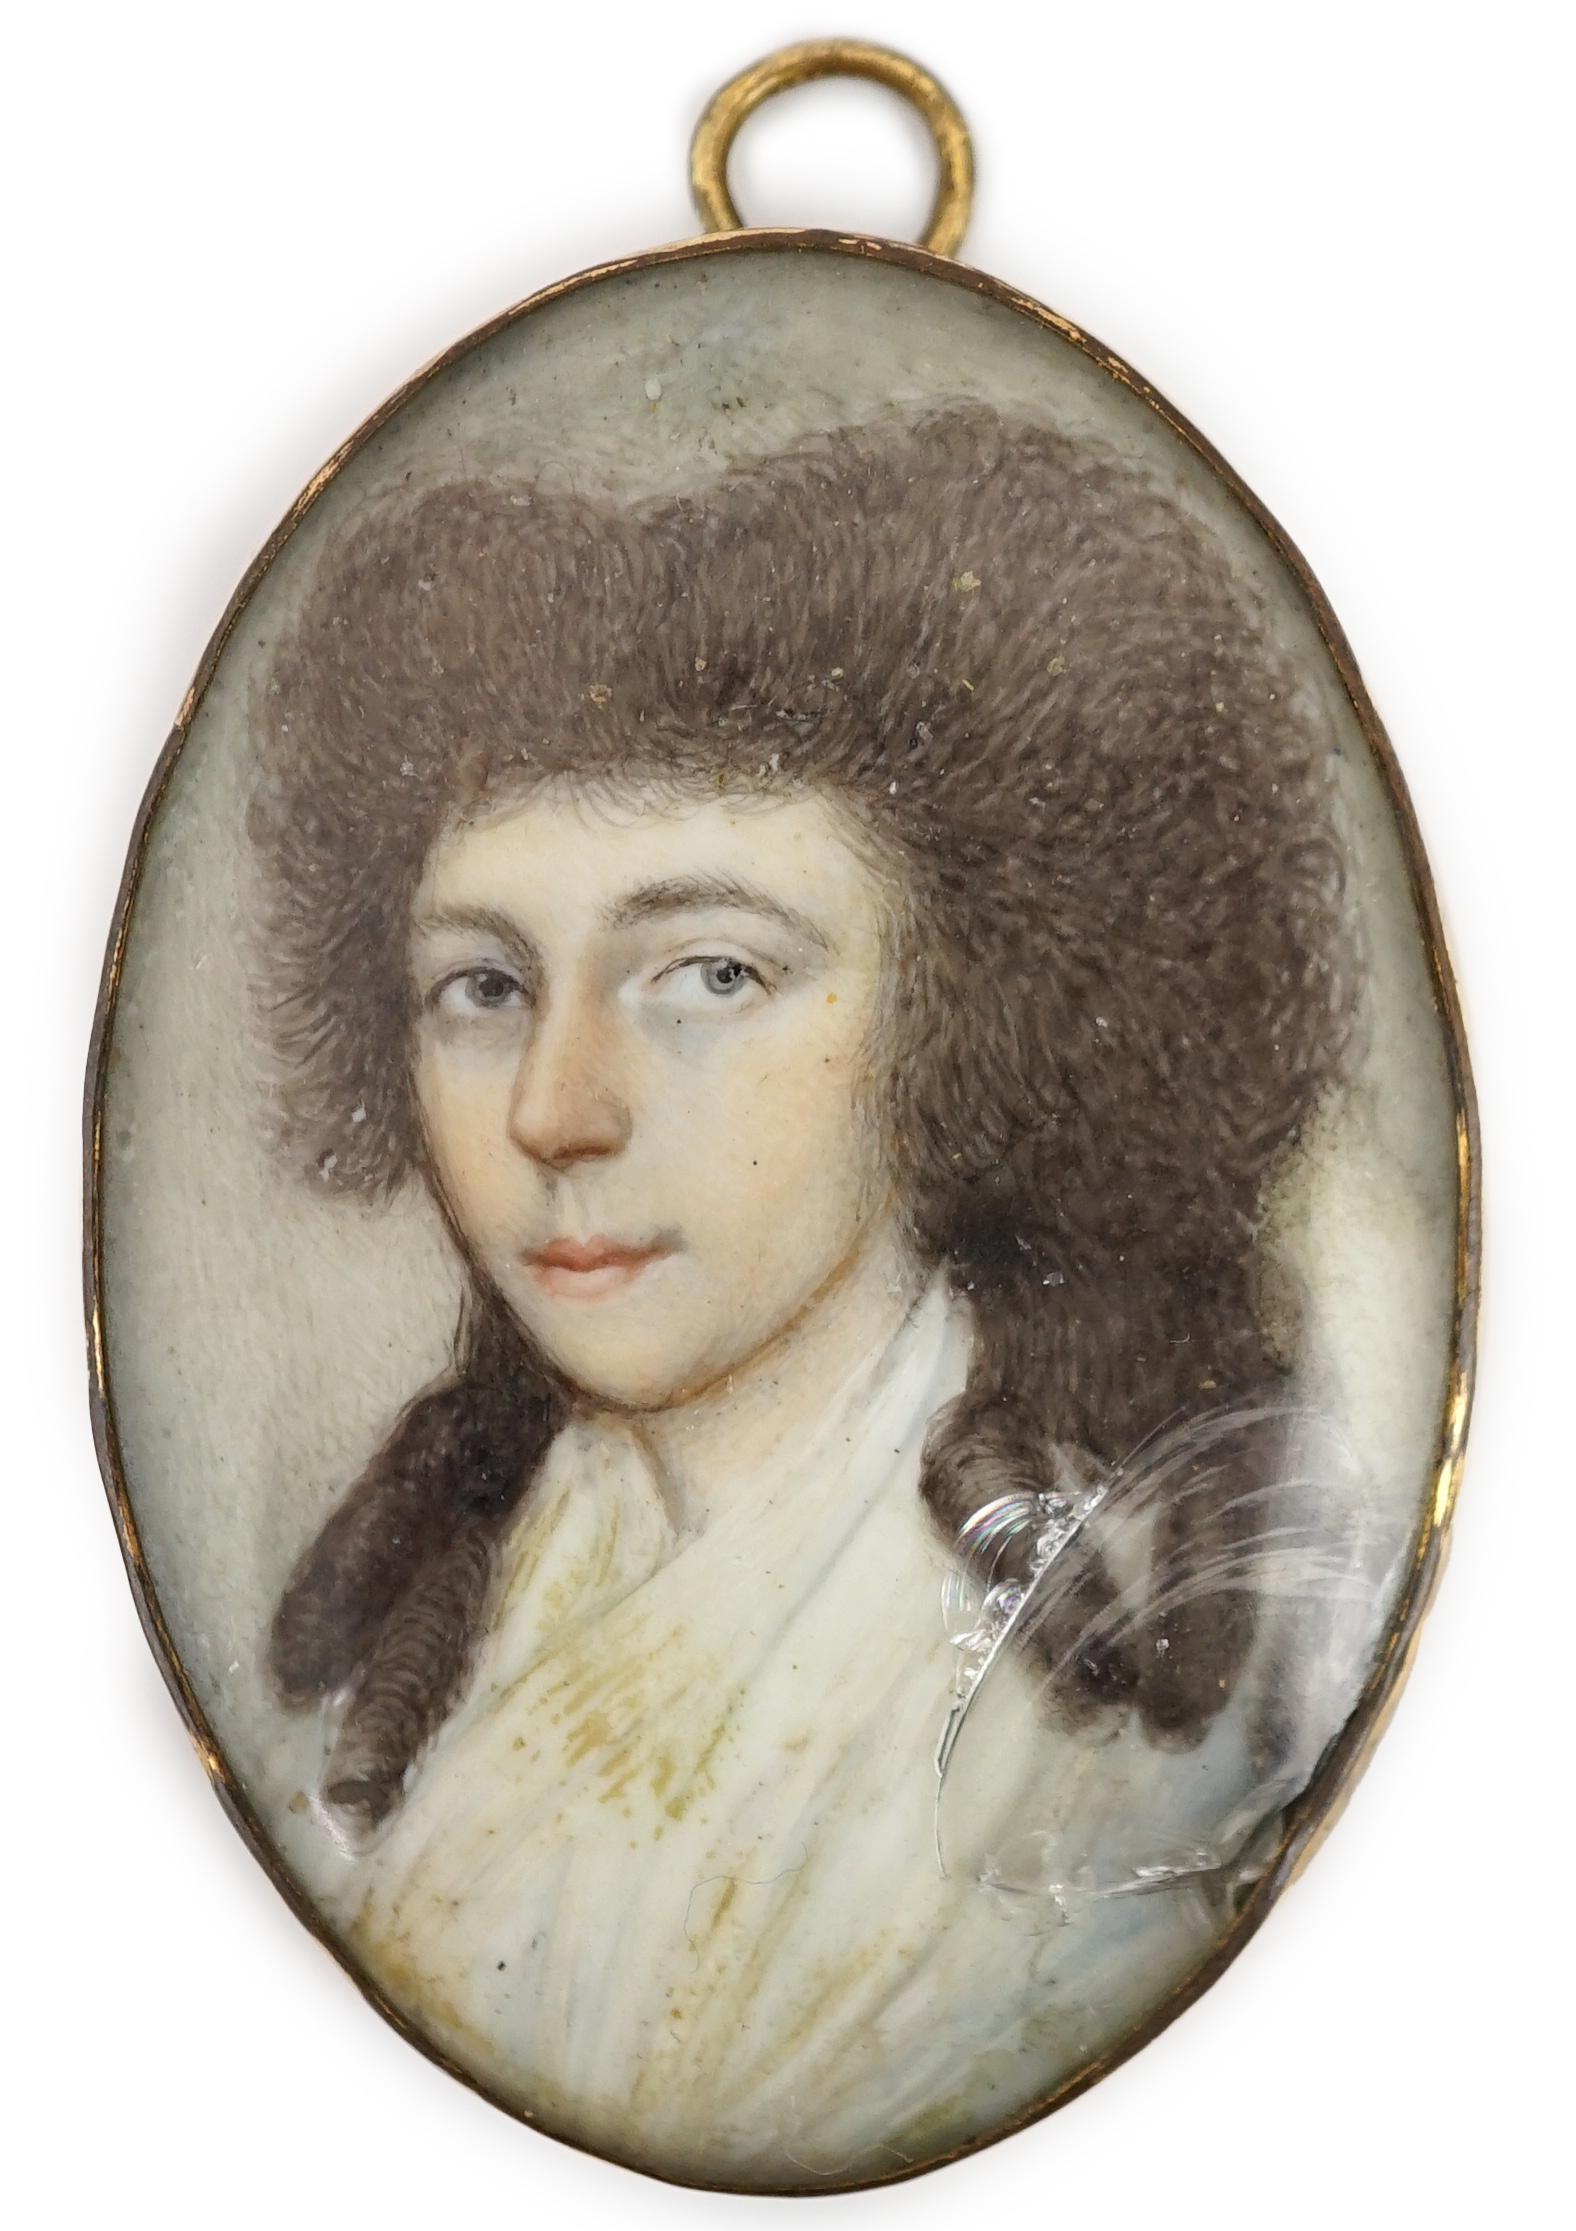 English School circa 1820, Portrait miniature of Mary Trant Ottley, wife of Cornelius Smelt, oil on ivory, 4.7 x 3.3cm. CITES Submission reference 1RQ3VDHH